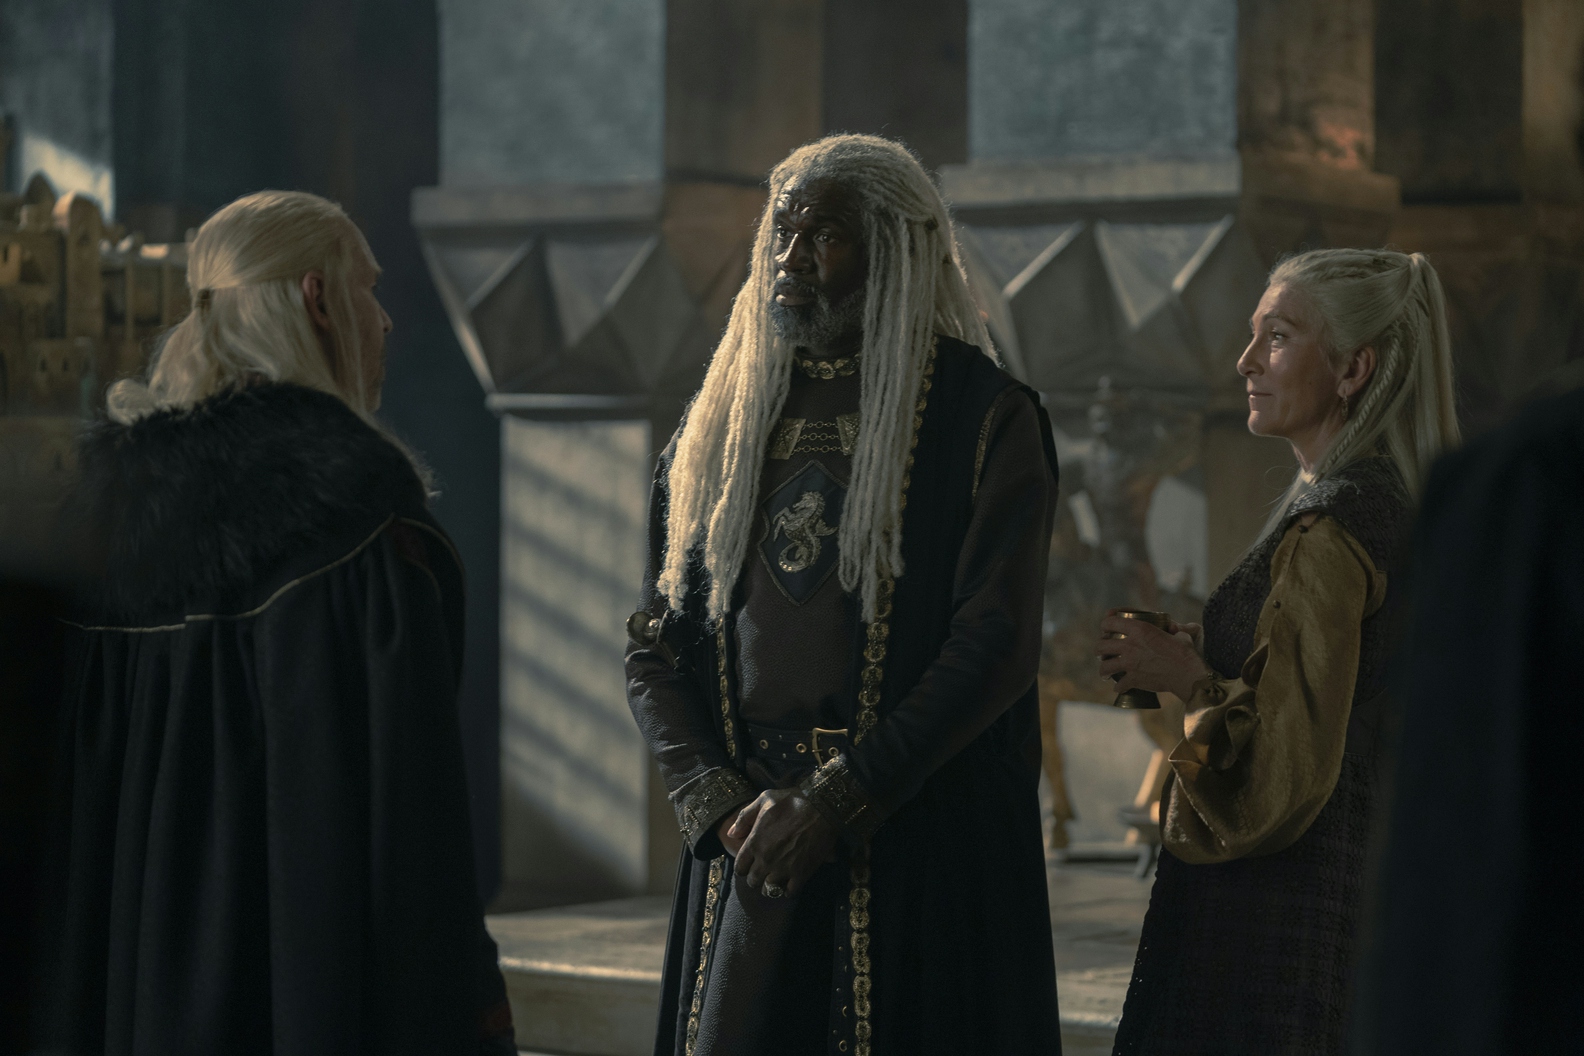 Image of Lord Corlys played by Steve Toussaint in "House of the Dragon" – the prequel to "Game of Thrones"